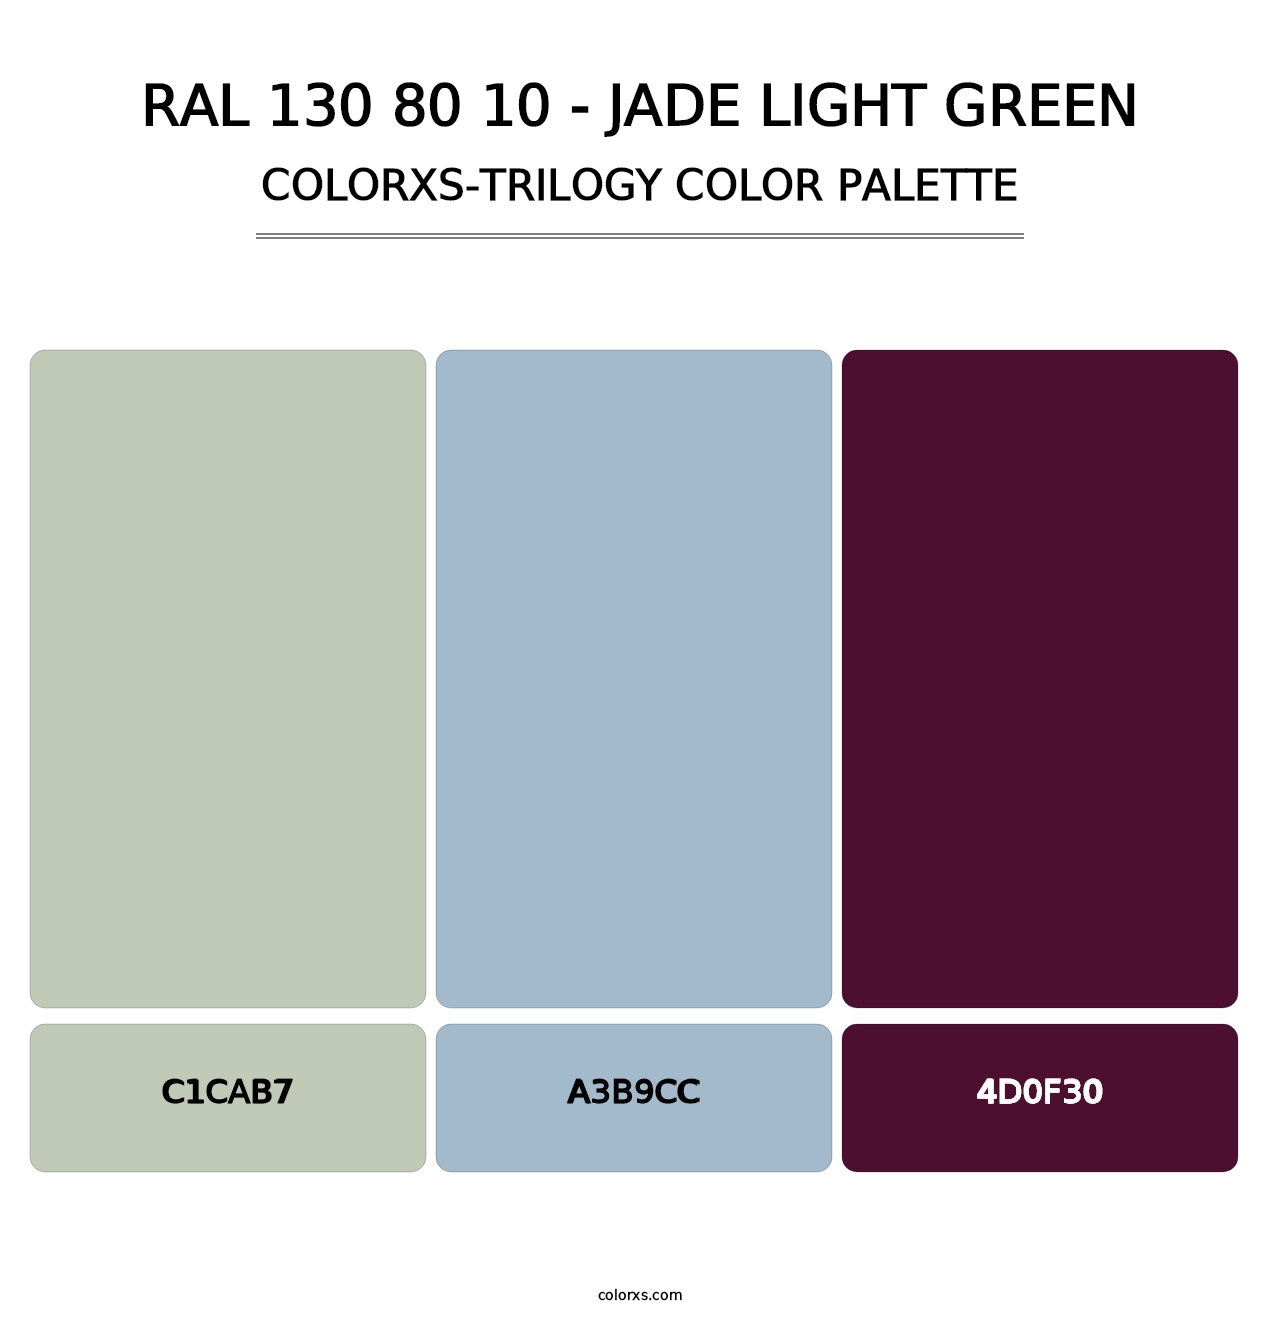 RAL 130 80 10 - Jade Light Green - Colorxs Trilogy Palette